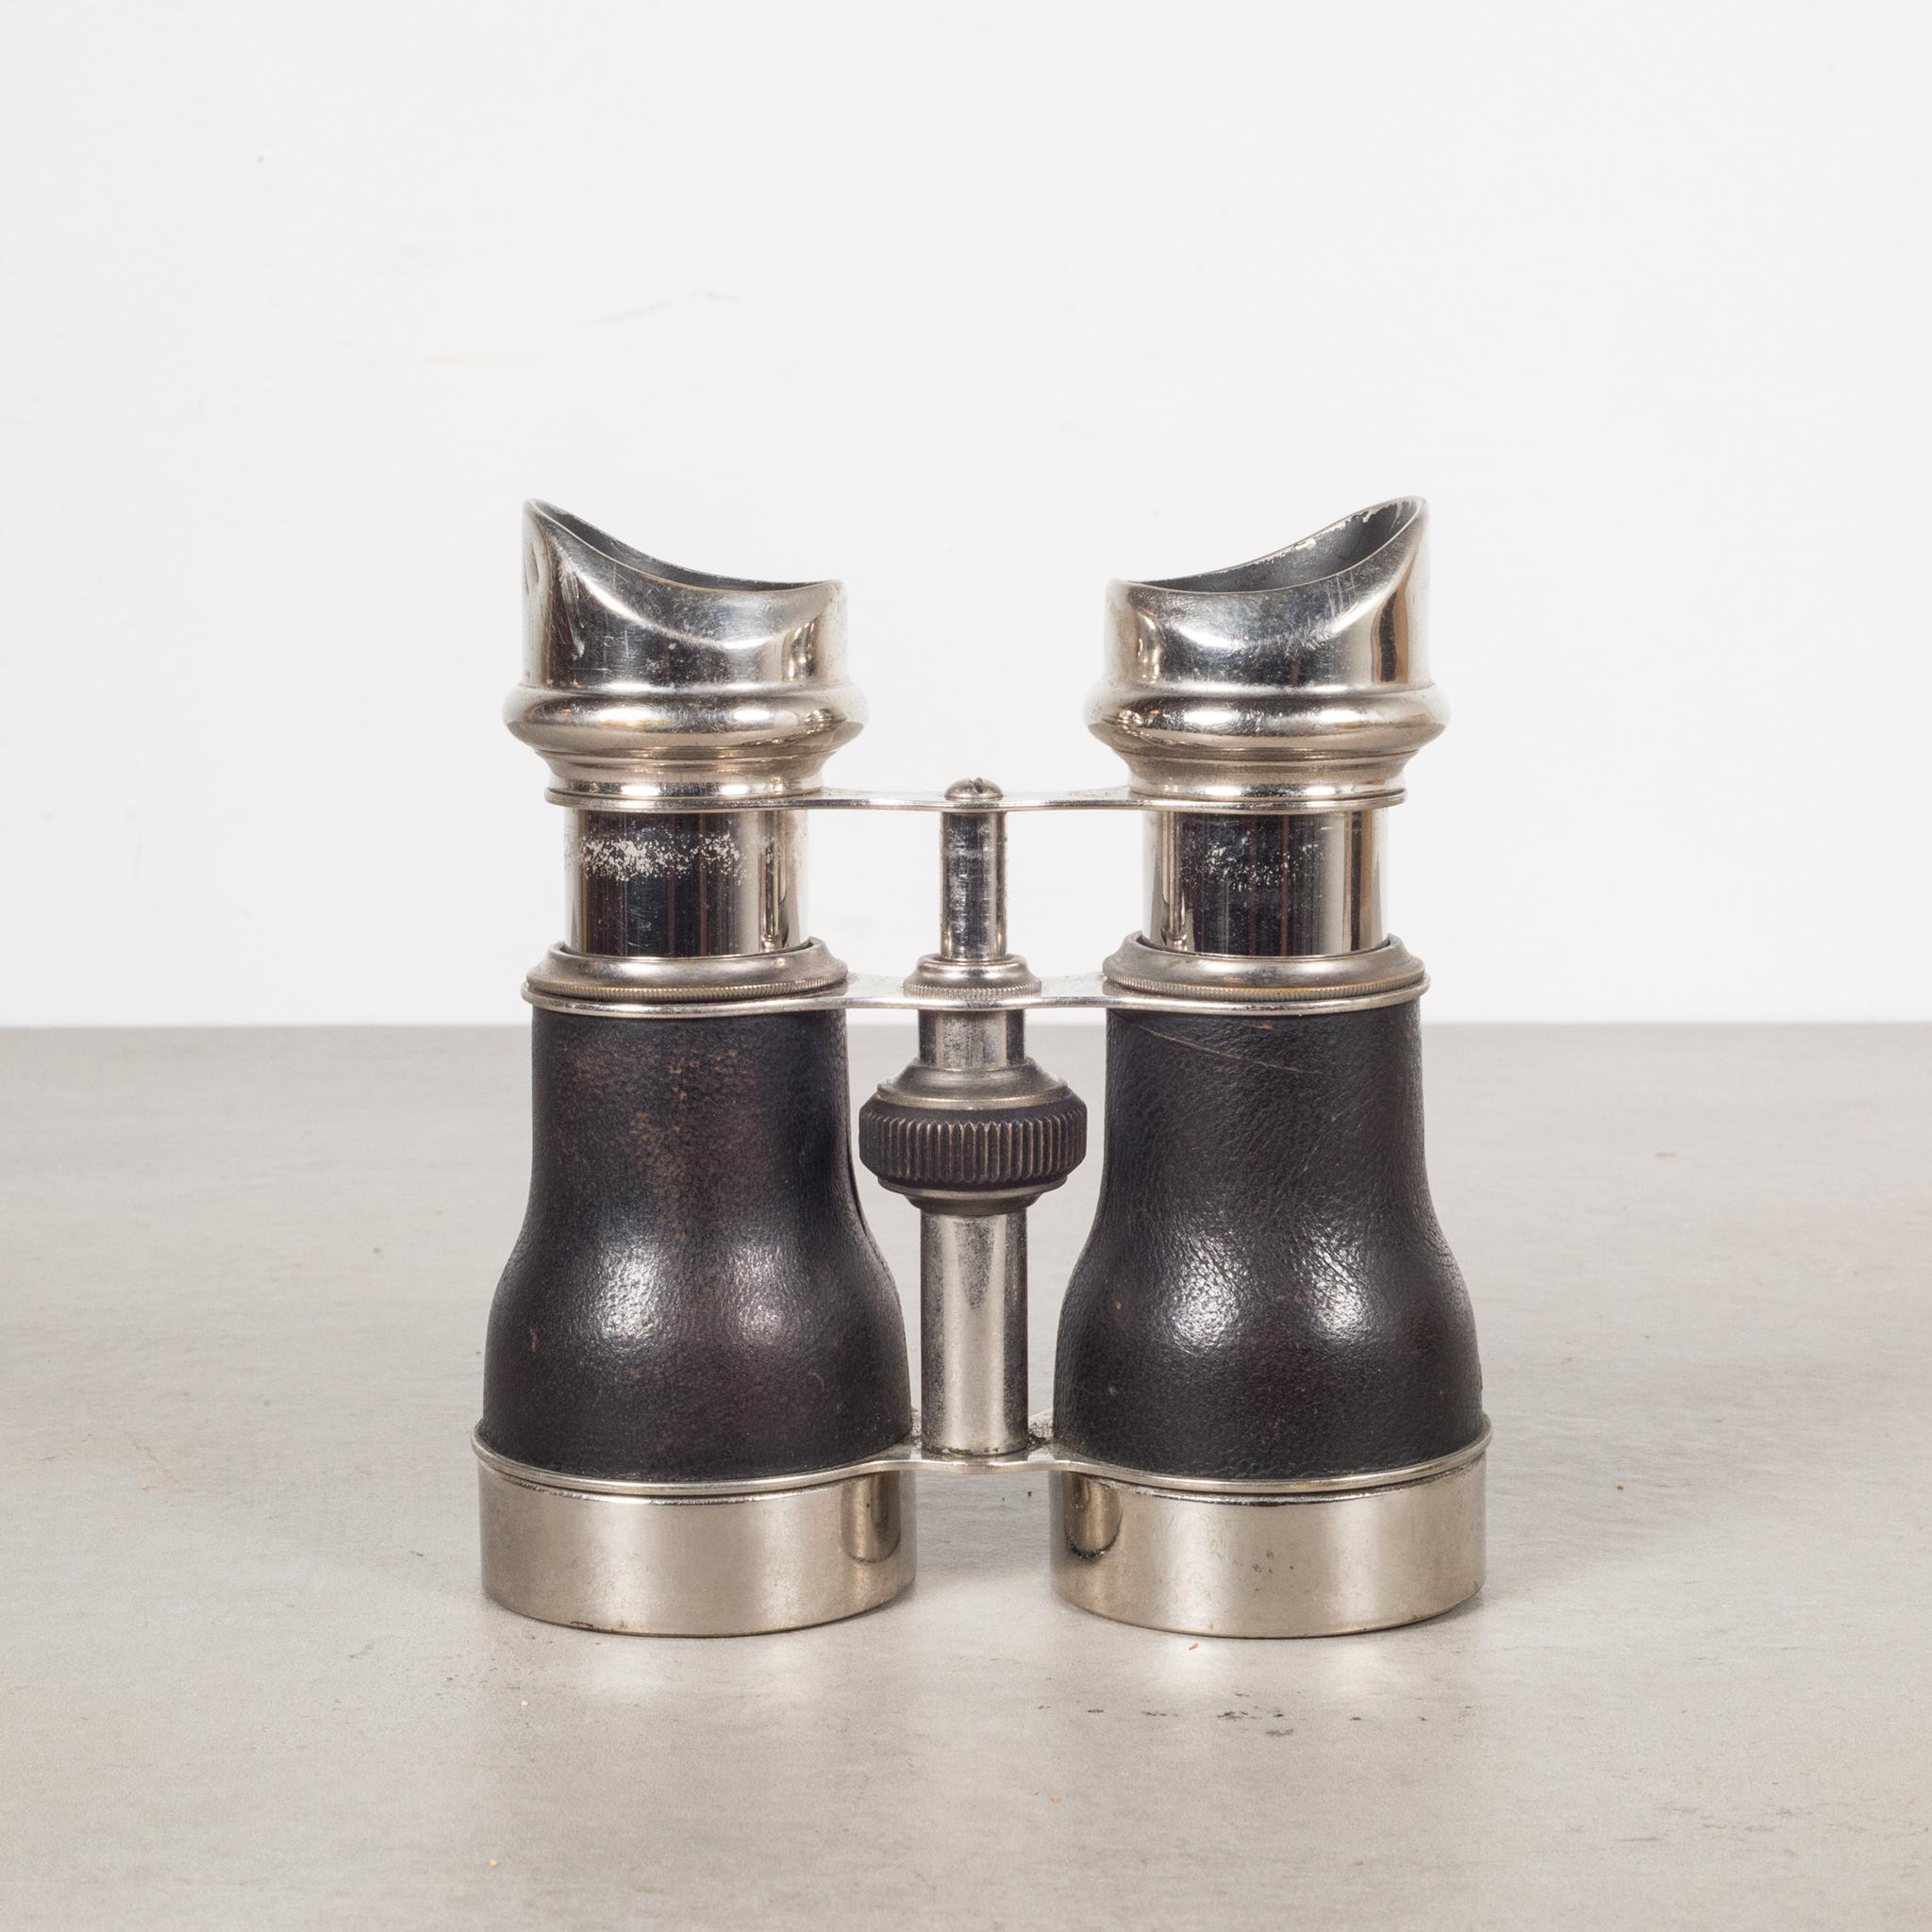 About

An original pair of leather and chrome field binoculars with original leather case. 